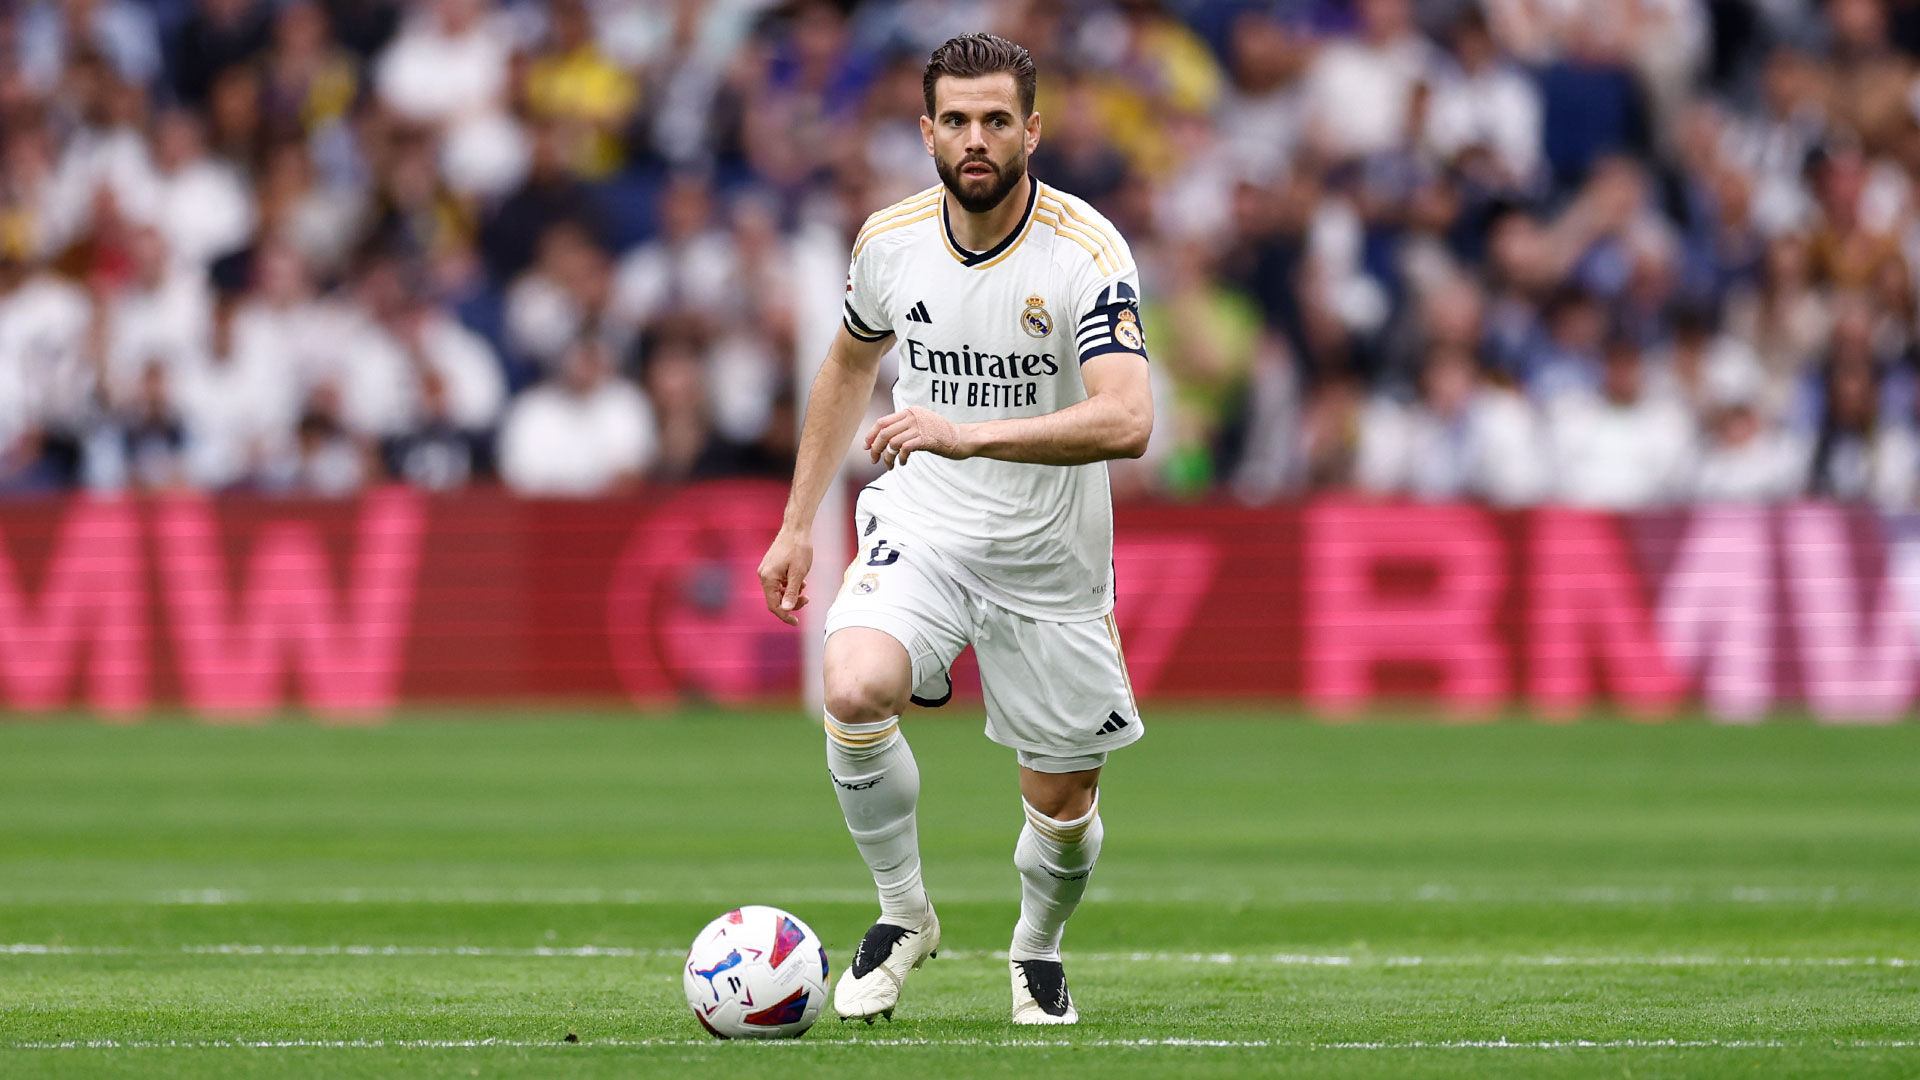 Nacho reaches 250 wins with Real Madrid